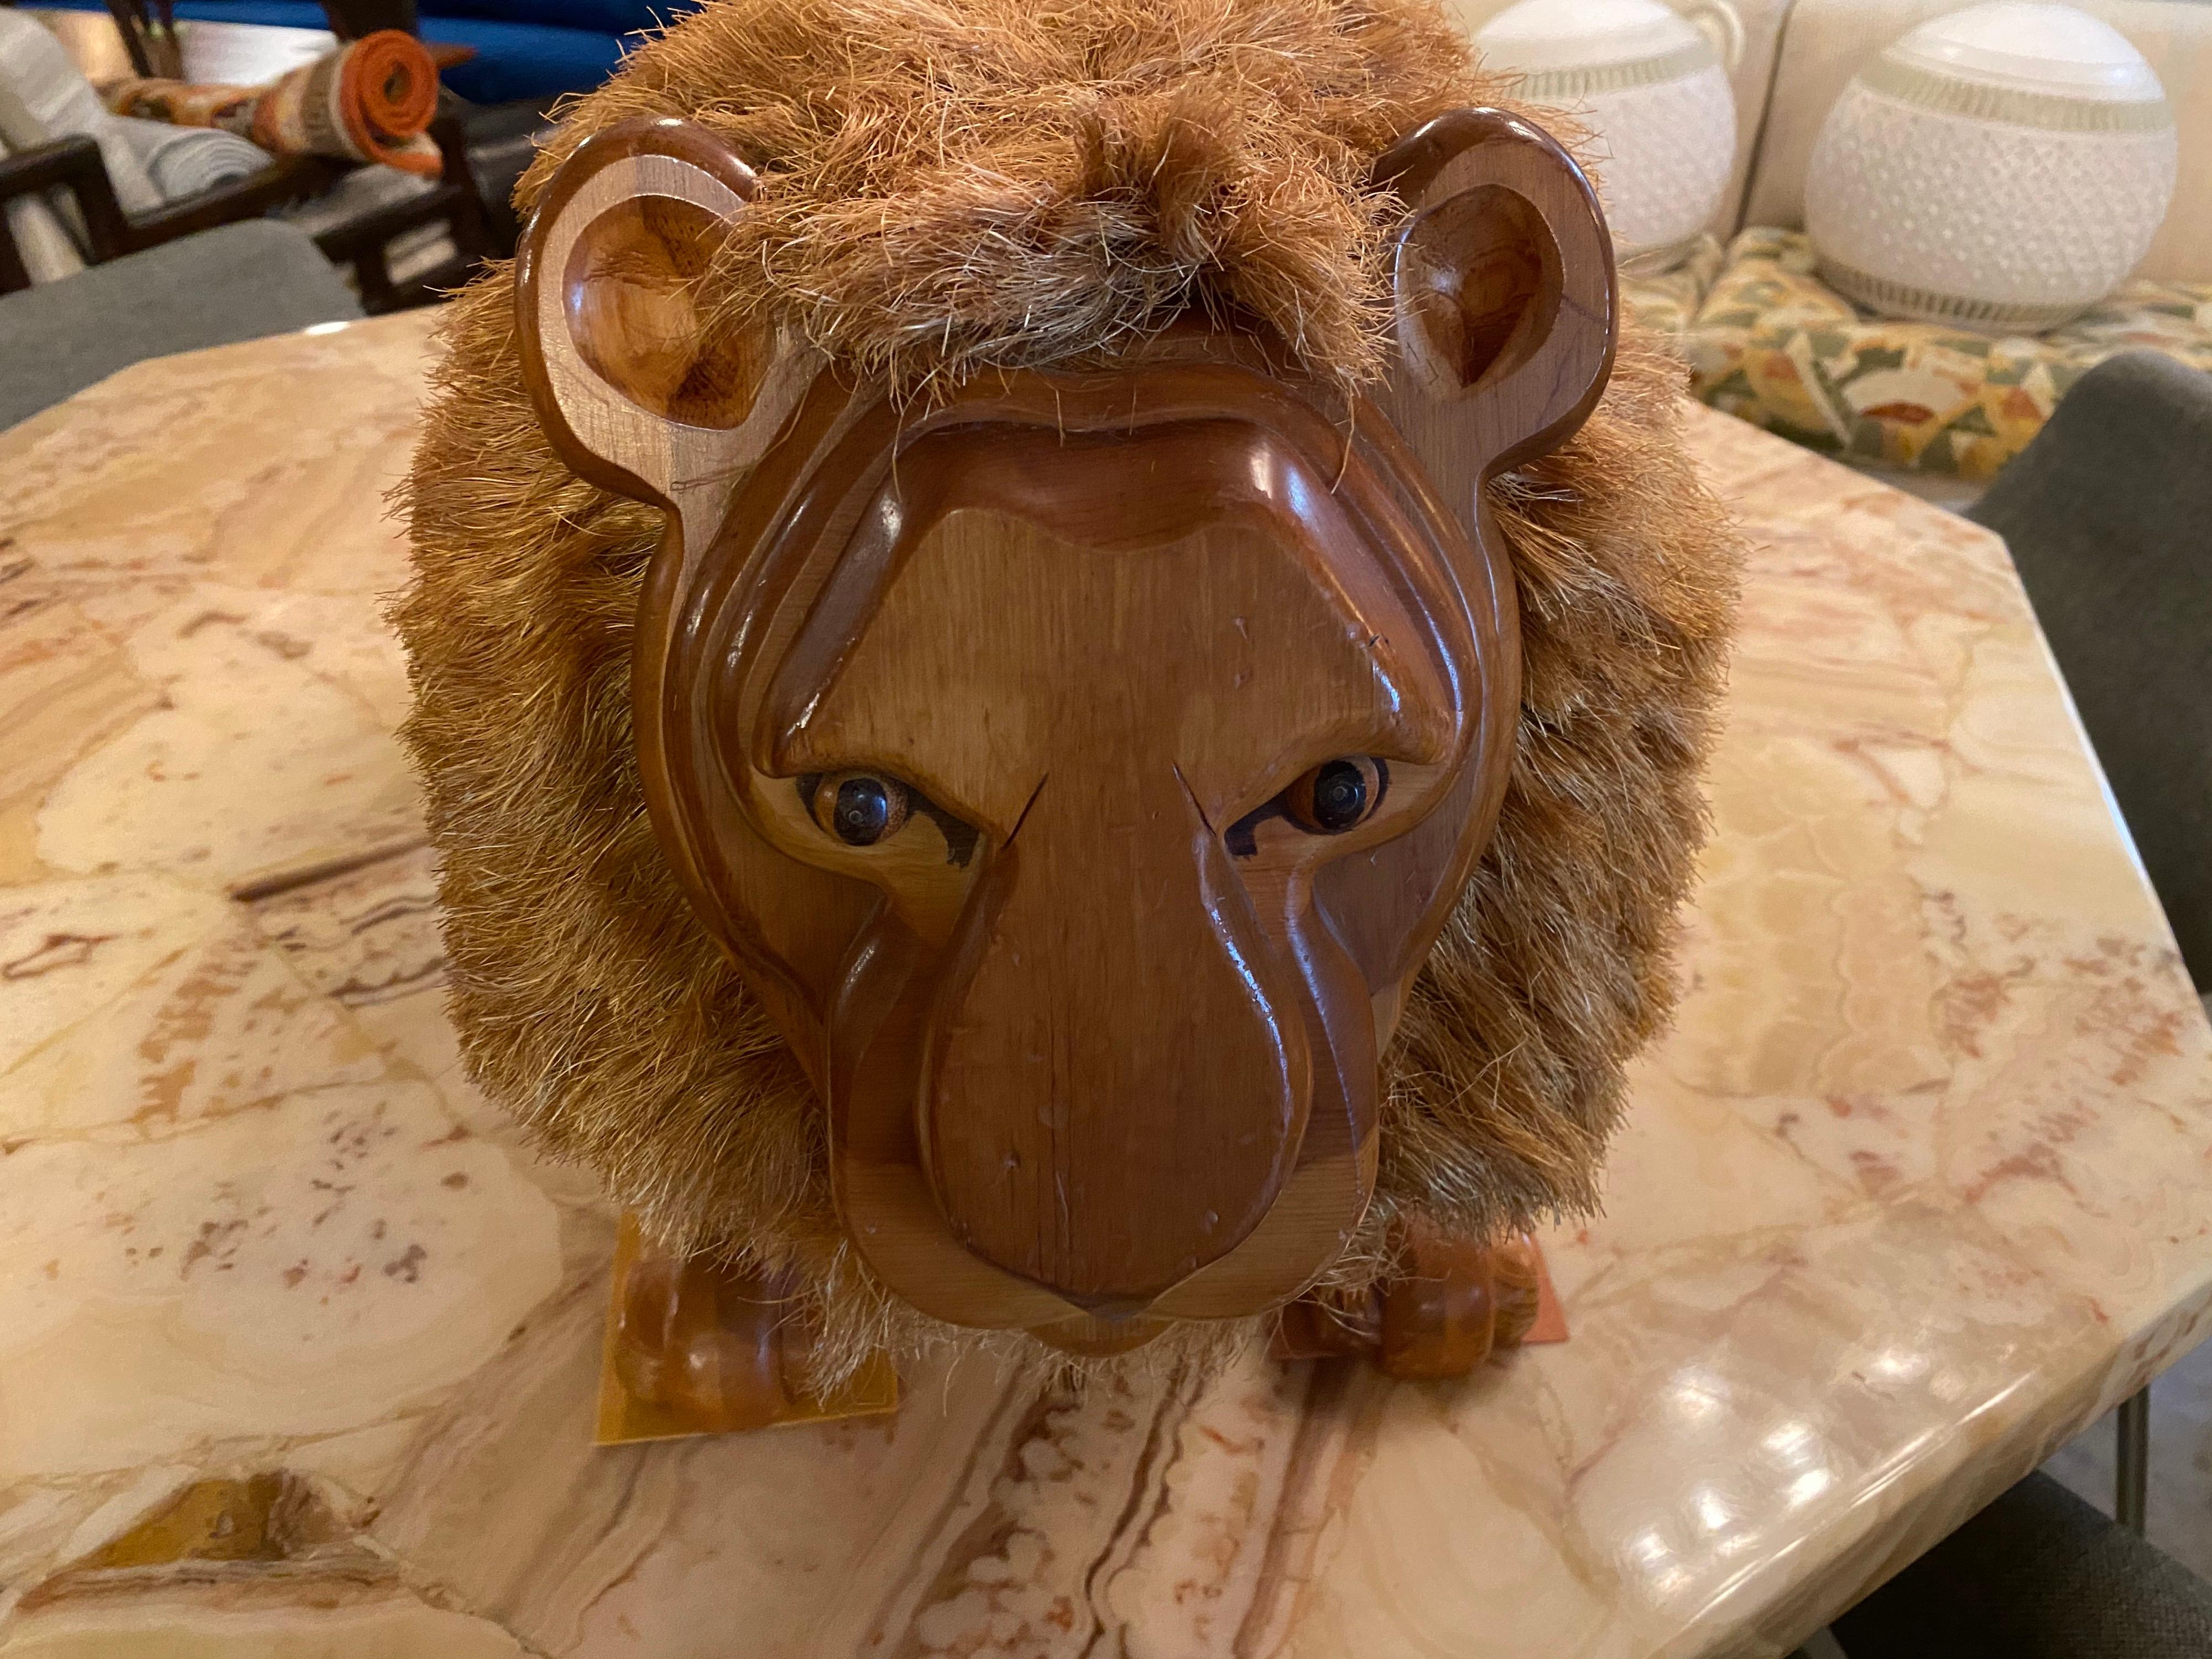 Adorable vintage wood carved lion footstool. The tail and mane are made of a rough-textured bristle. Great for a child's room or just to have as a unique piece in any space. This vintage footstool is in good overall condition.